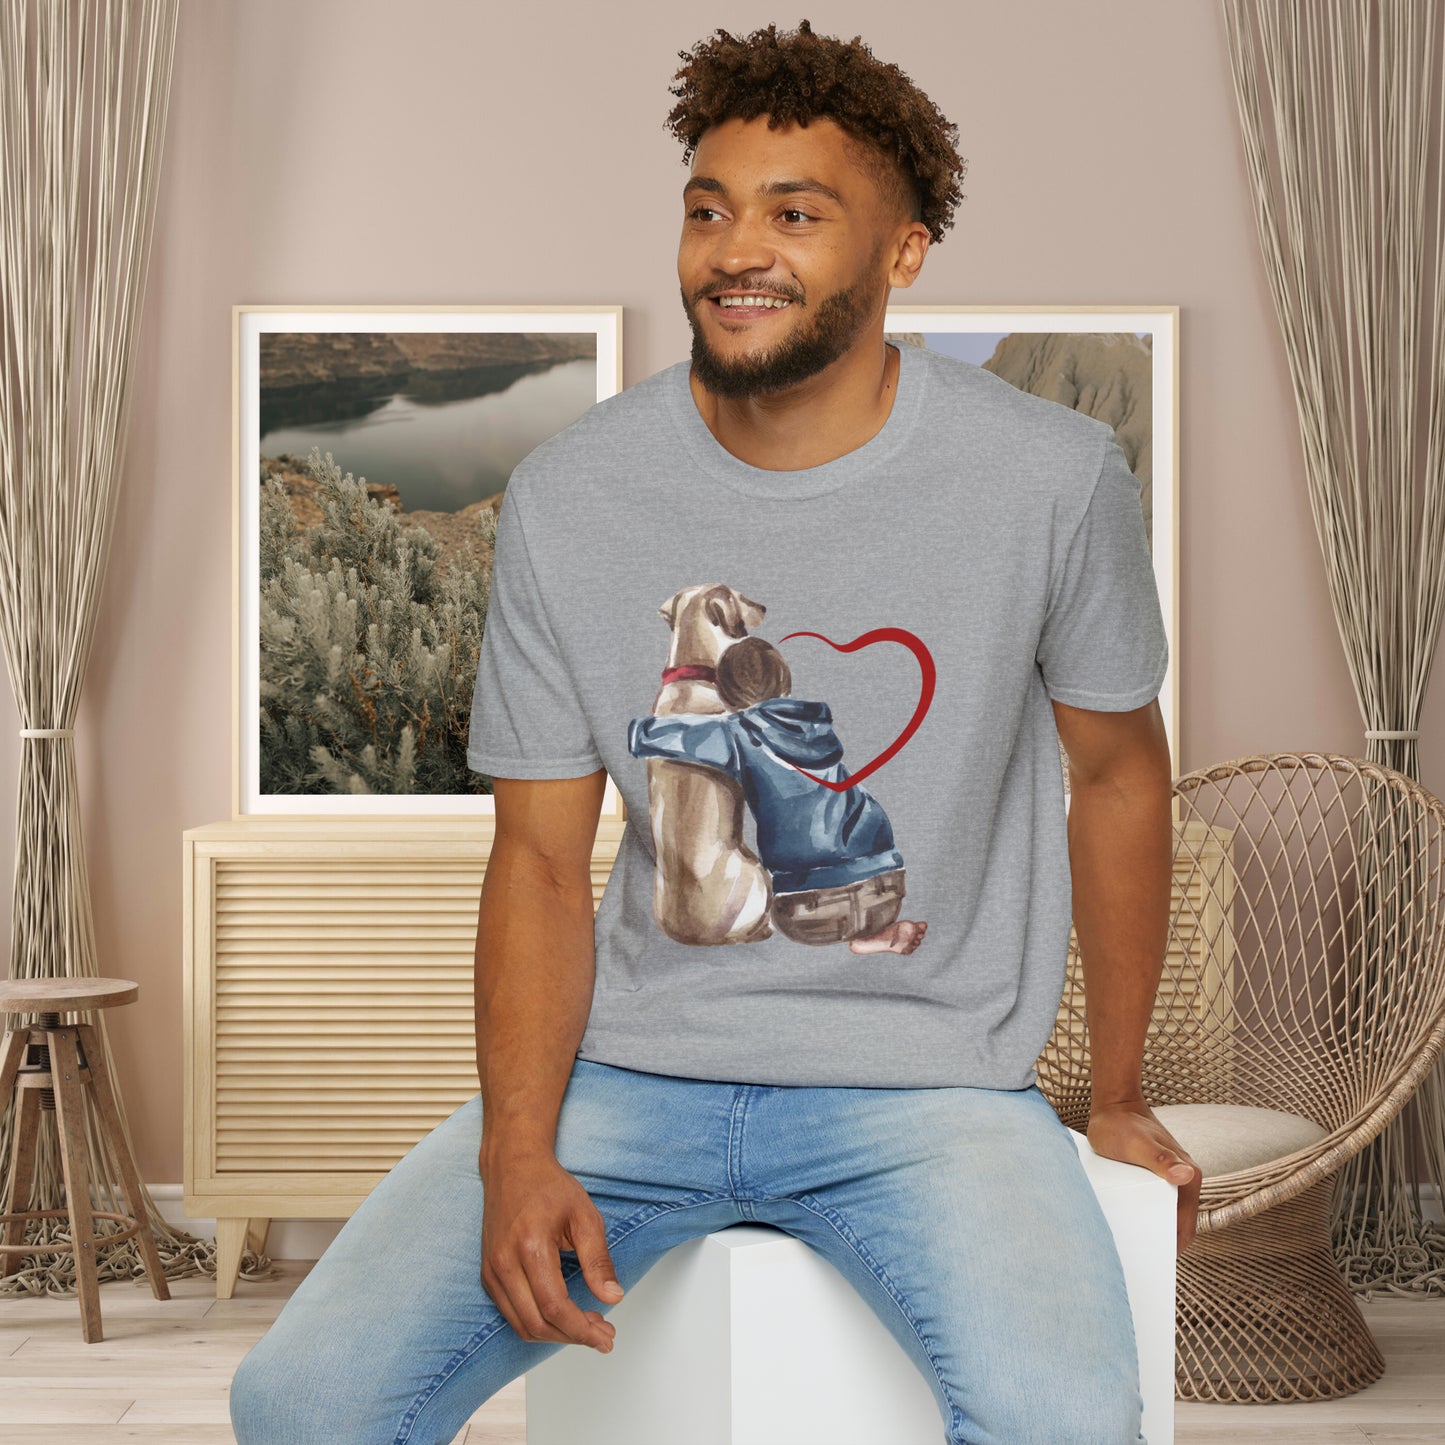 Unconditional love! This Tee celebrates the love we share with our furry friends! Unisex Softstyle T-Shirt is made for the dog lover in you.